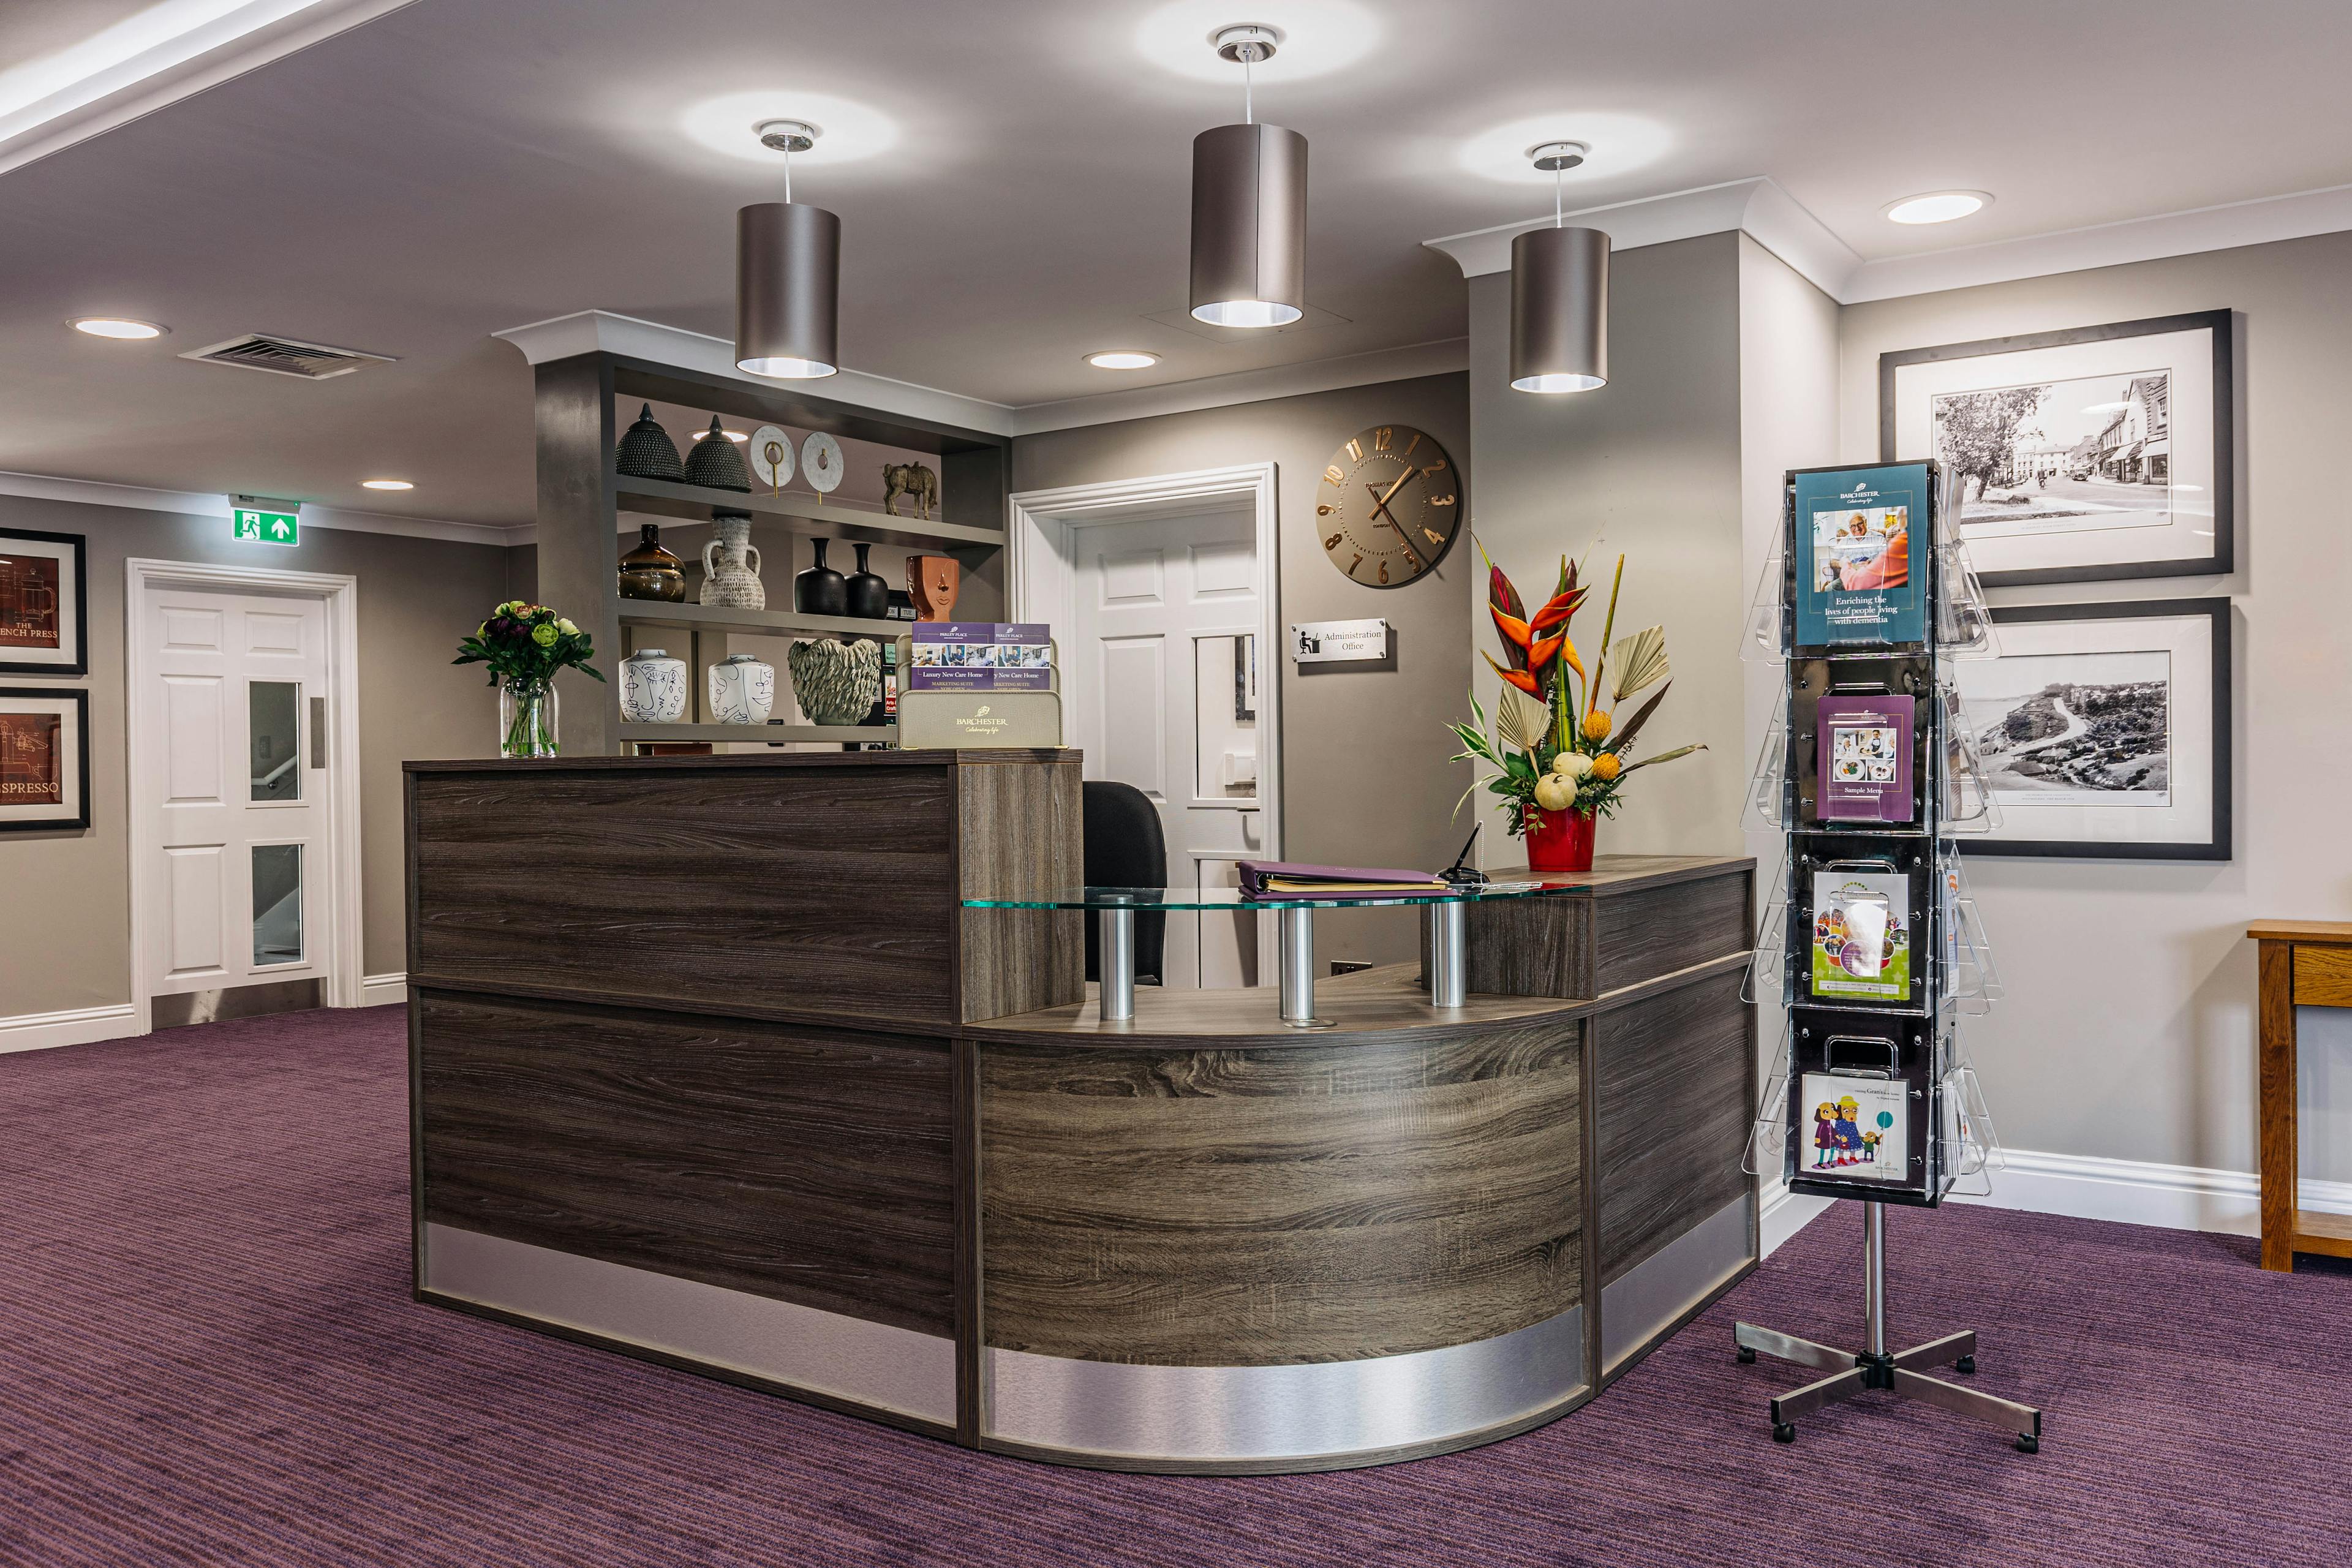 Reception at Parley Place Care Home in Ferndown, Dorset